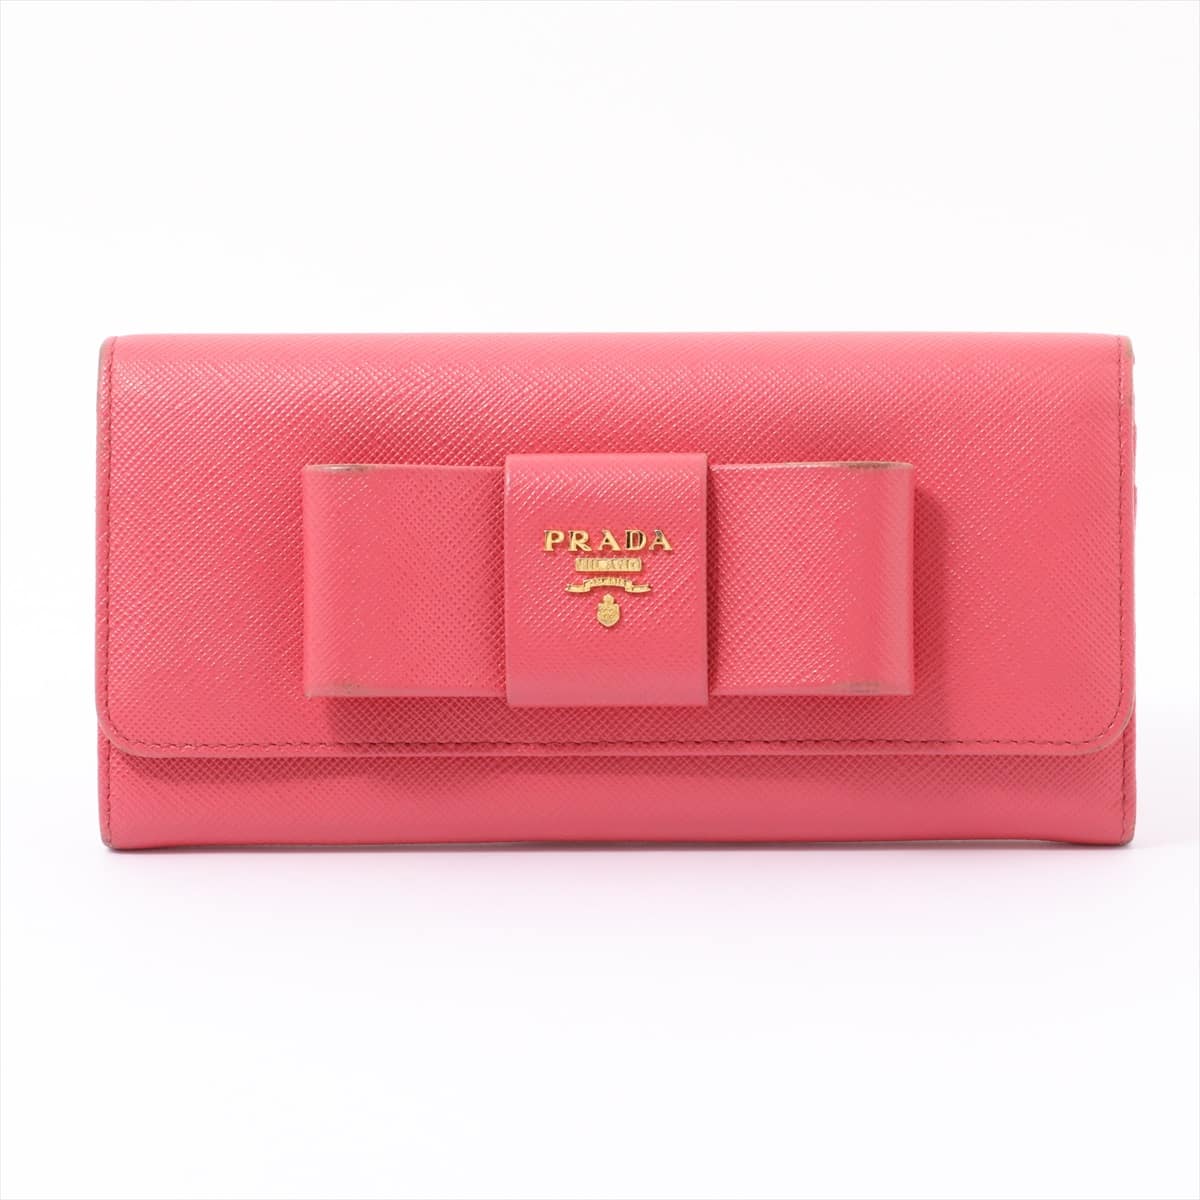 Prada Saffiano 1MH132 Leather Wallet Pink